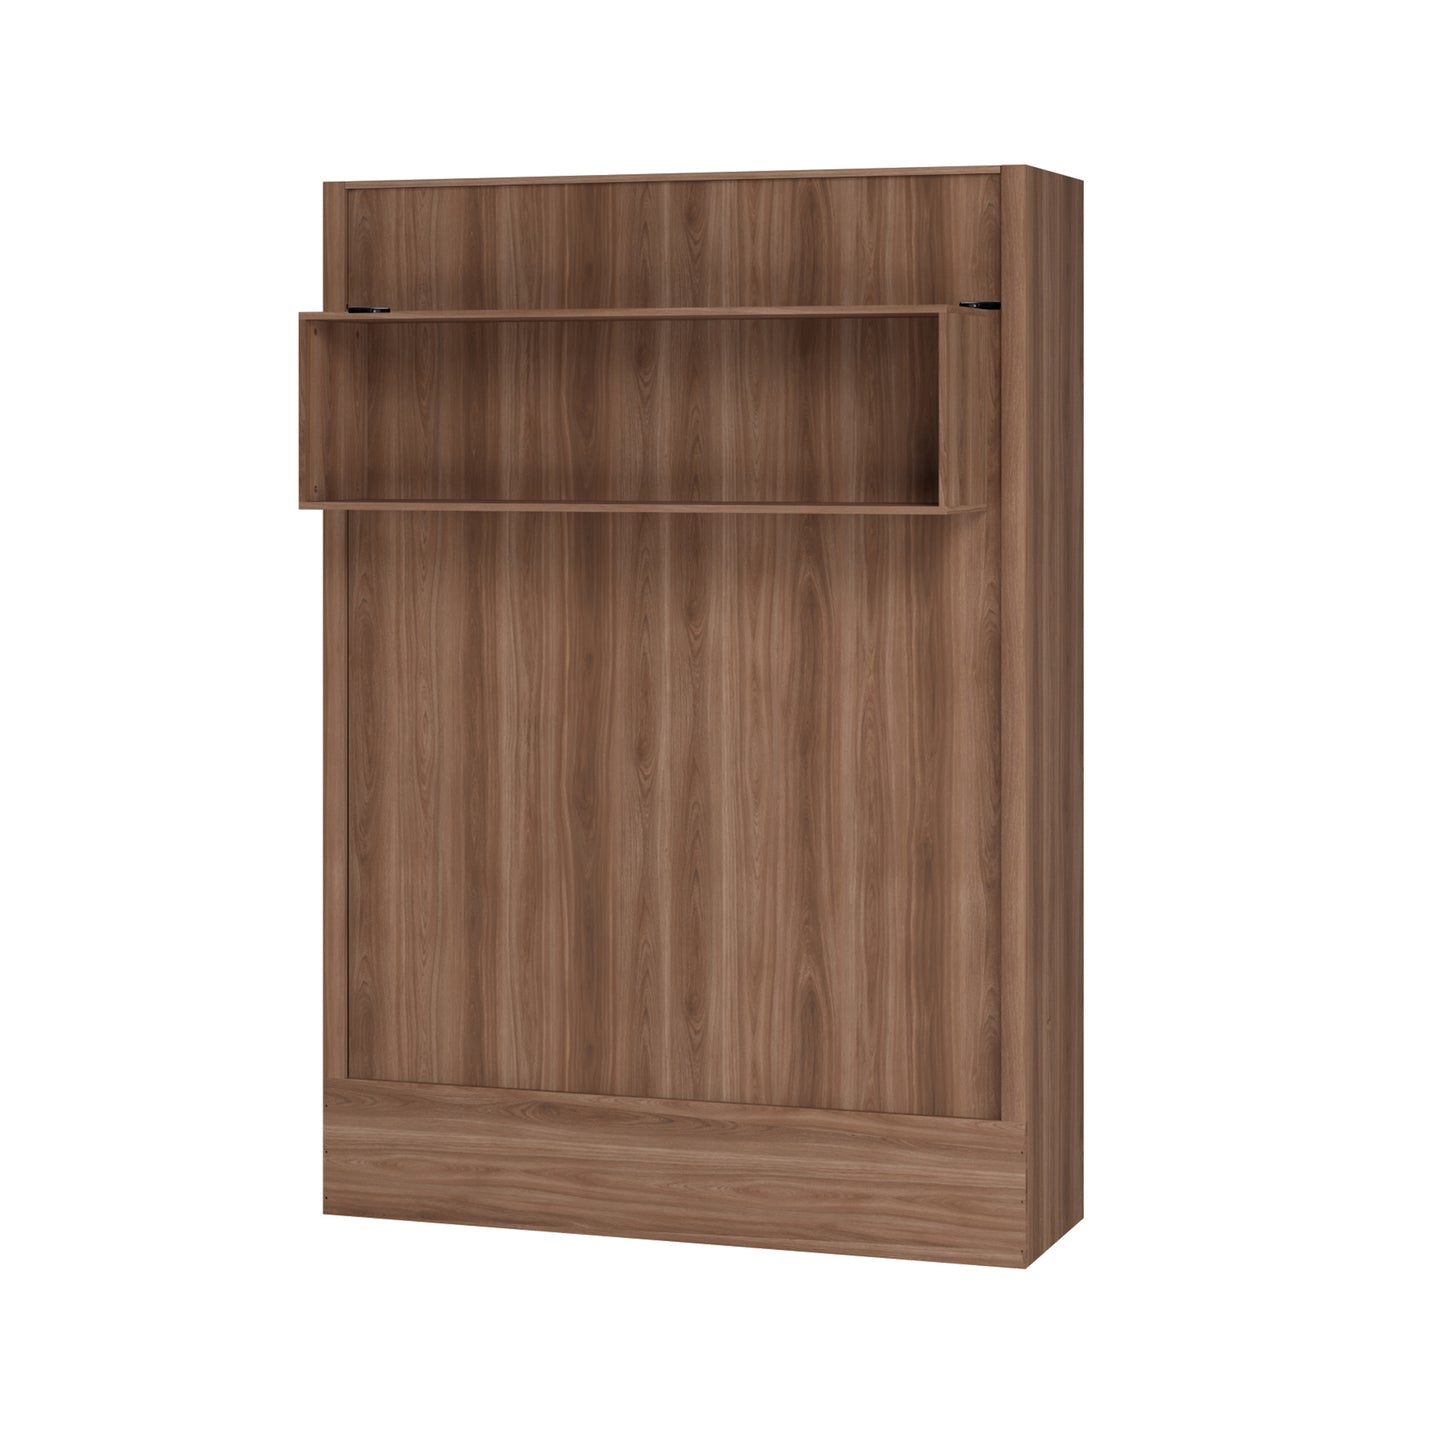 Easy-Lift Full Murphy Wall Bed in Natural Brown Wood Grain with Shelf